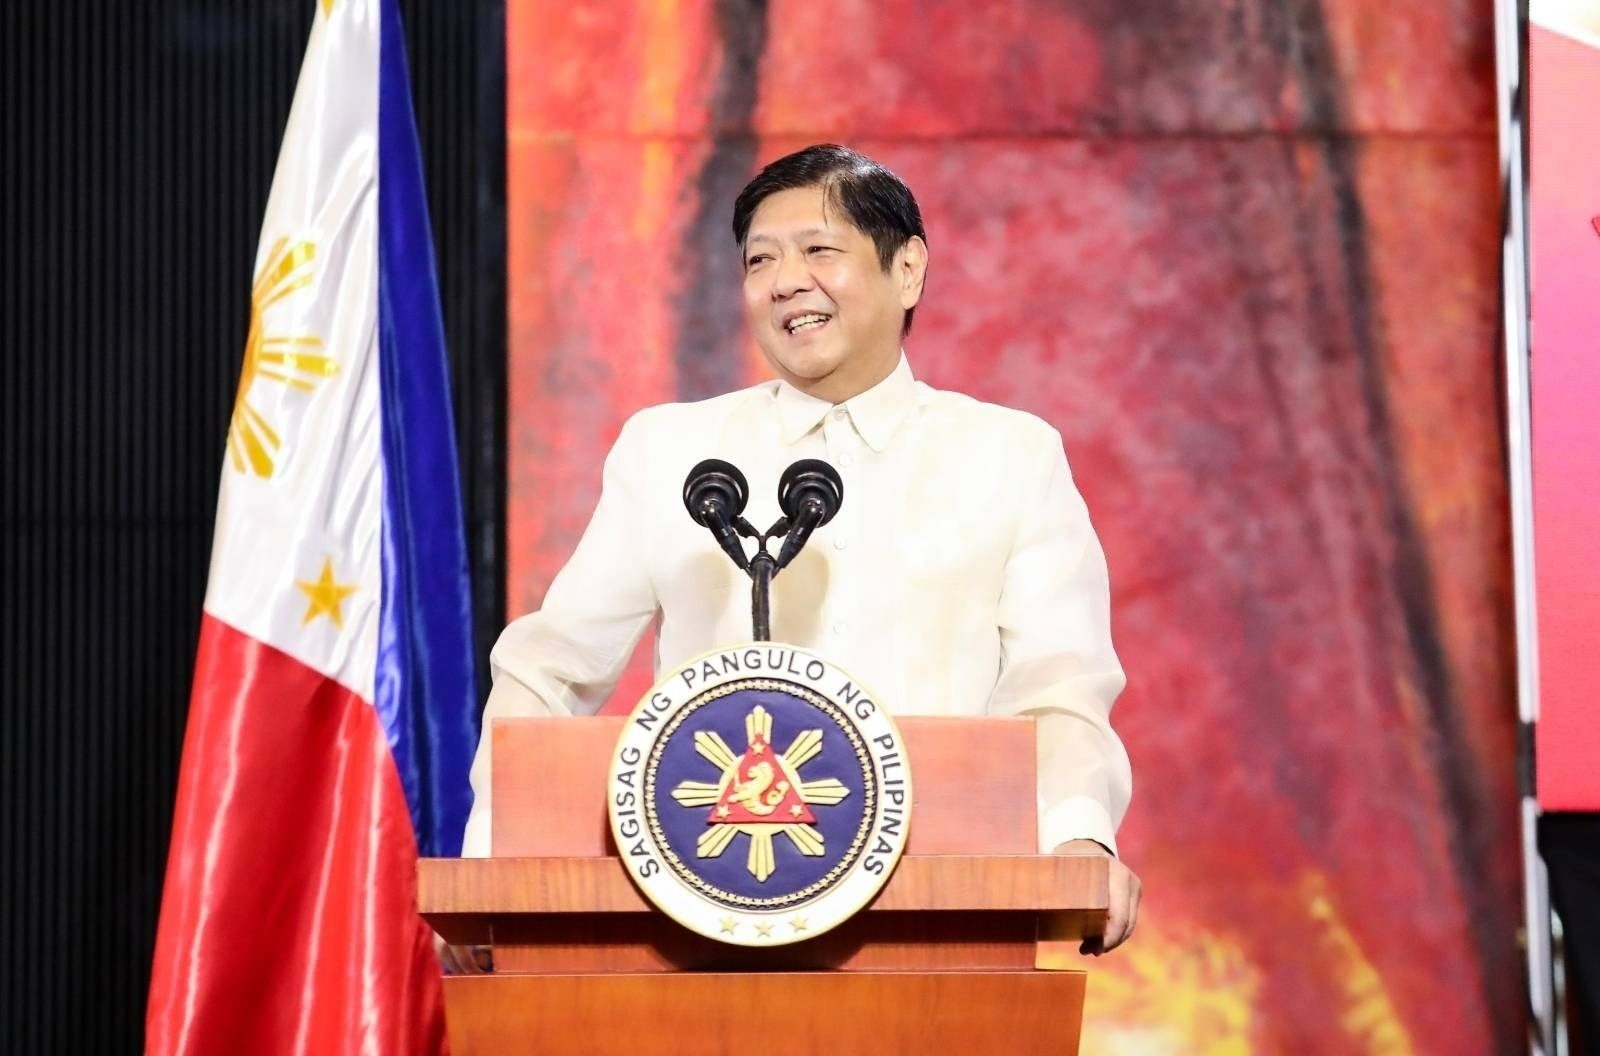 Marcos on 1st 100 days: ‘Putting out fires, finding best and brightest’